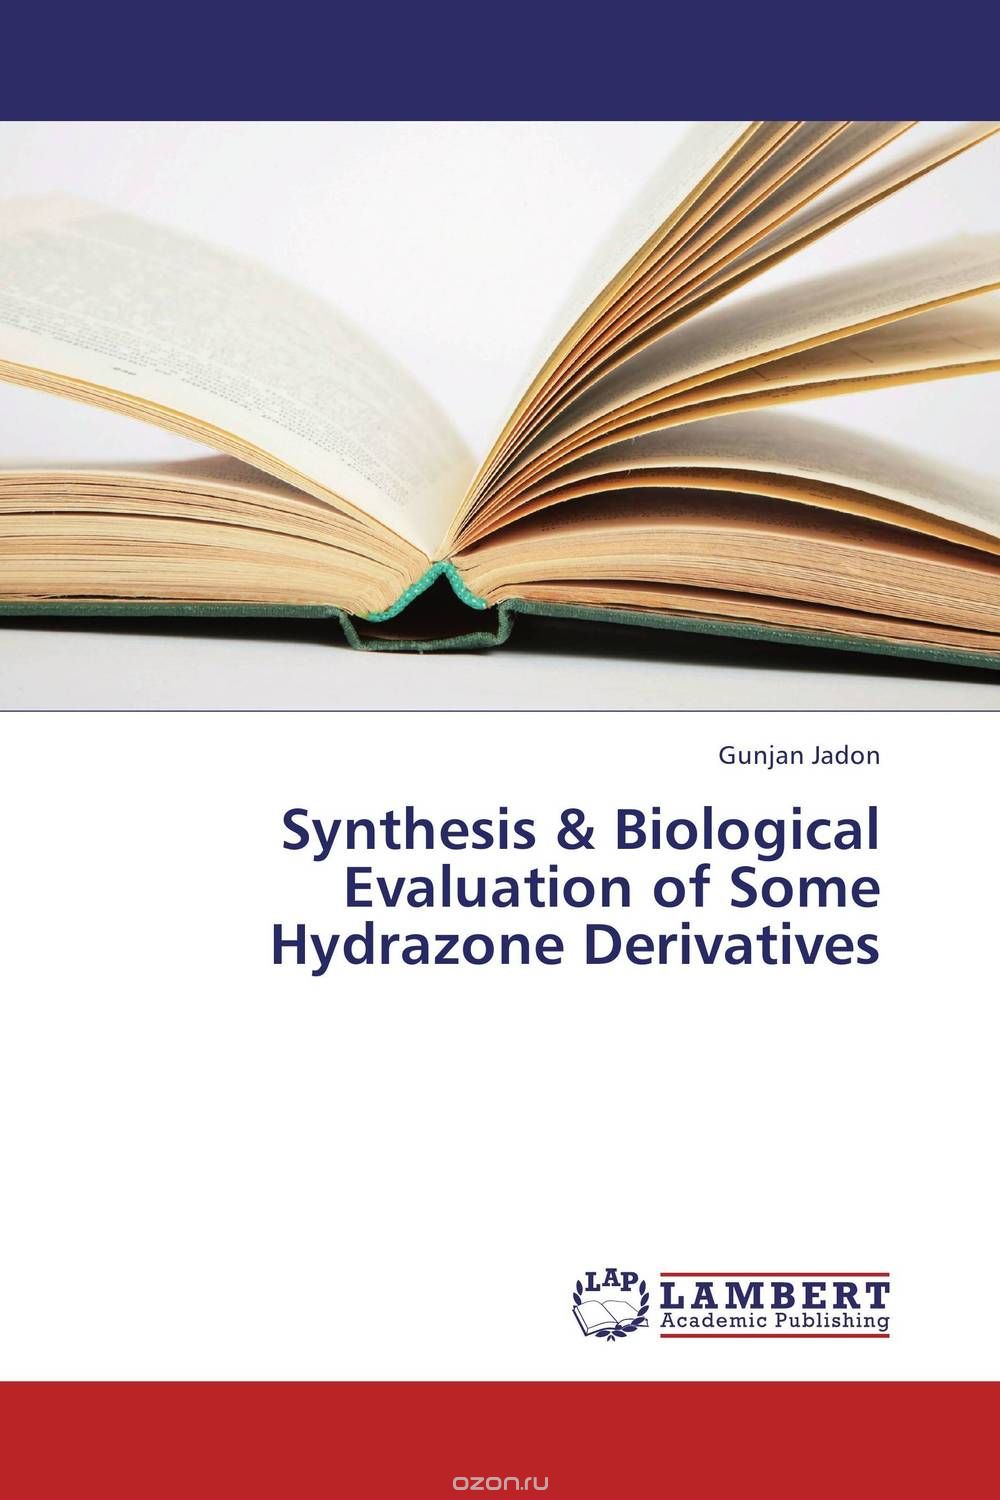 Скачать книгу "Synthesis & Biological Evaluation of Some Hydrazone Derivatives"